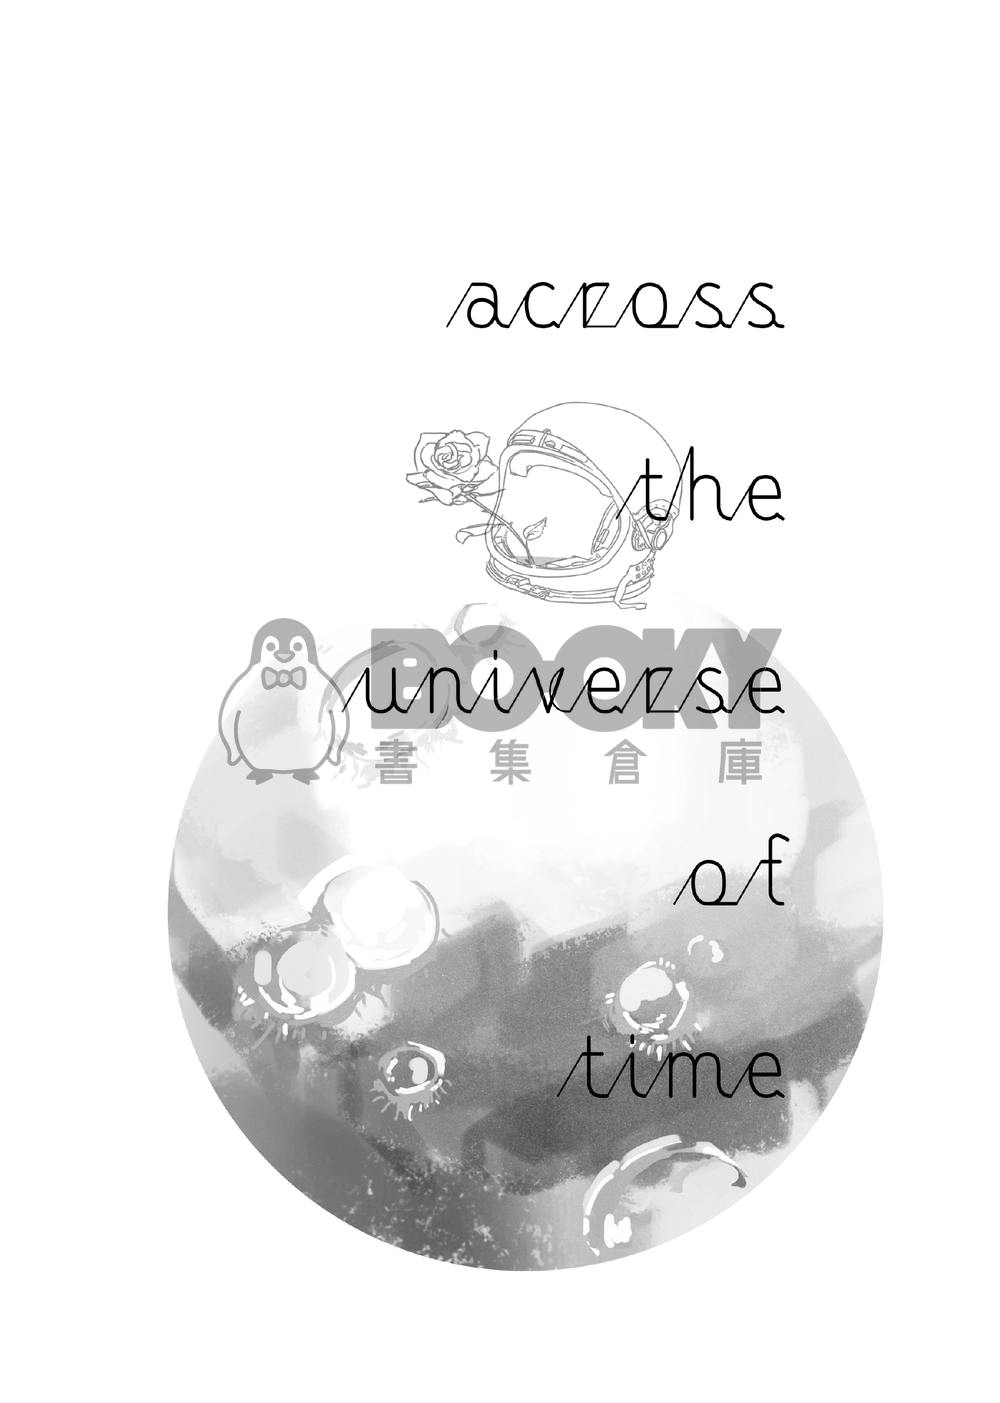 Across the Universe of Time 試閱圖片